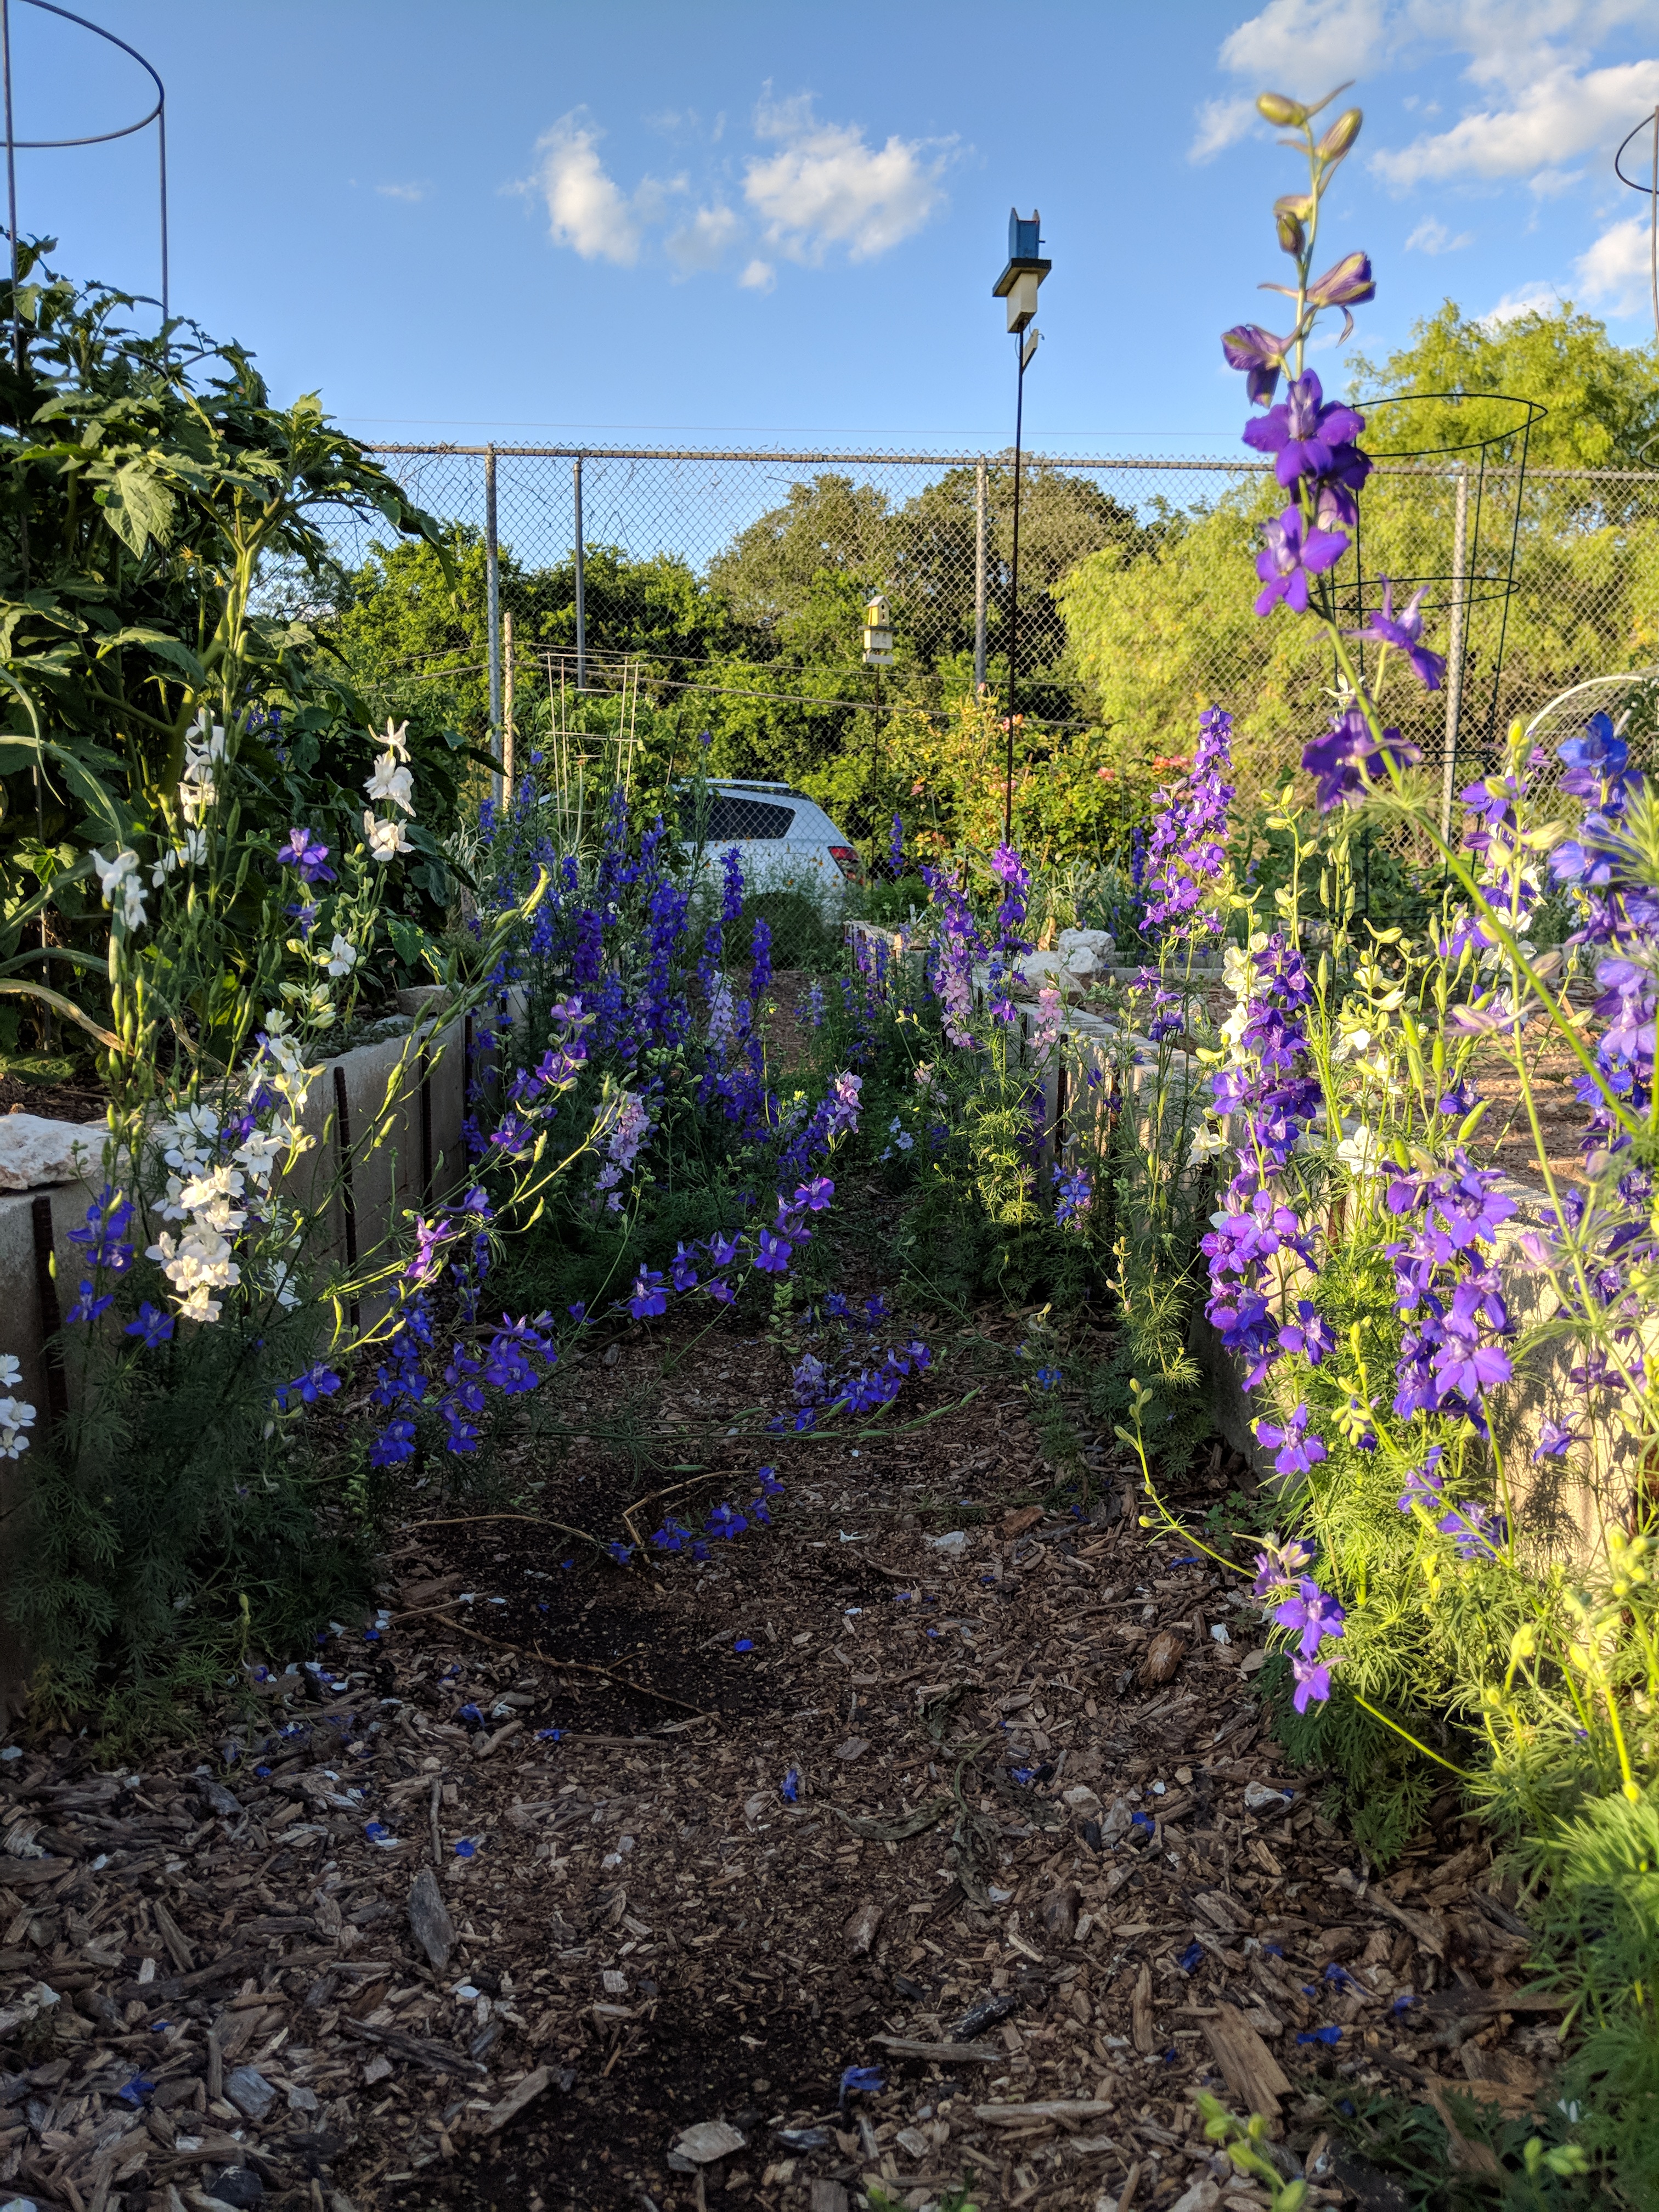 Flowers at the Jacob's Well Community Garden in Wimberley, Texas